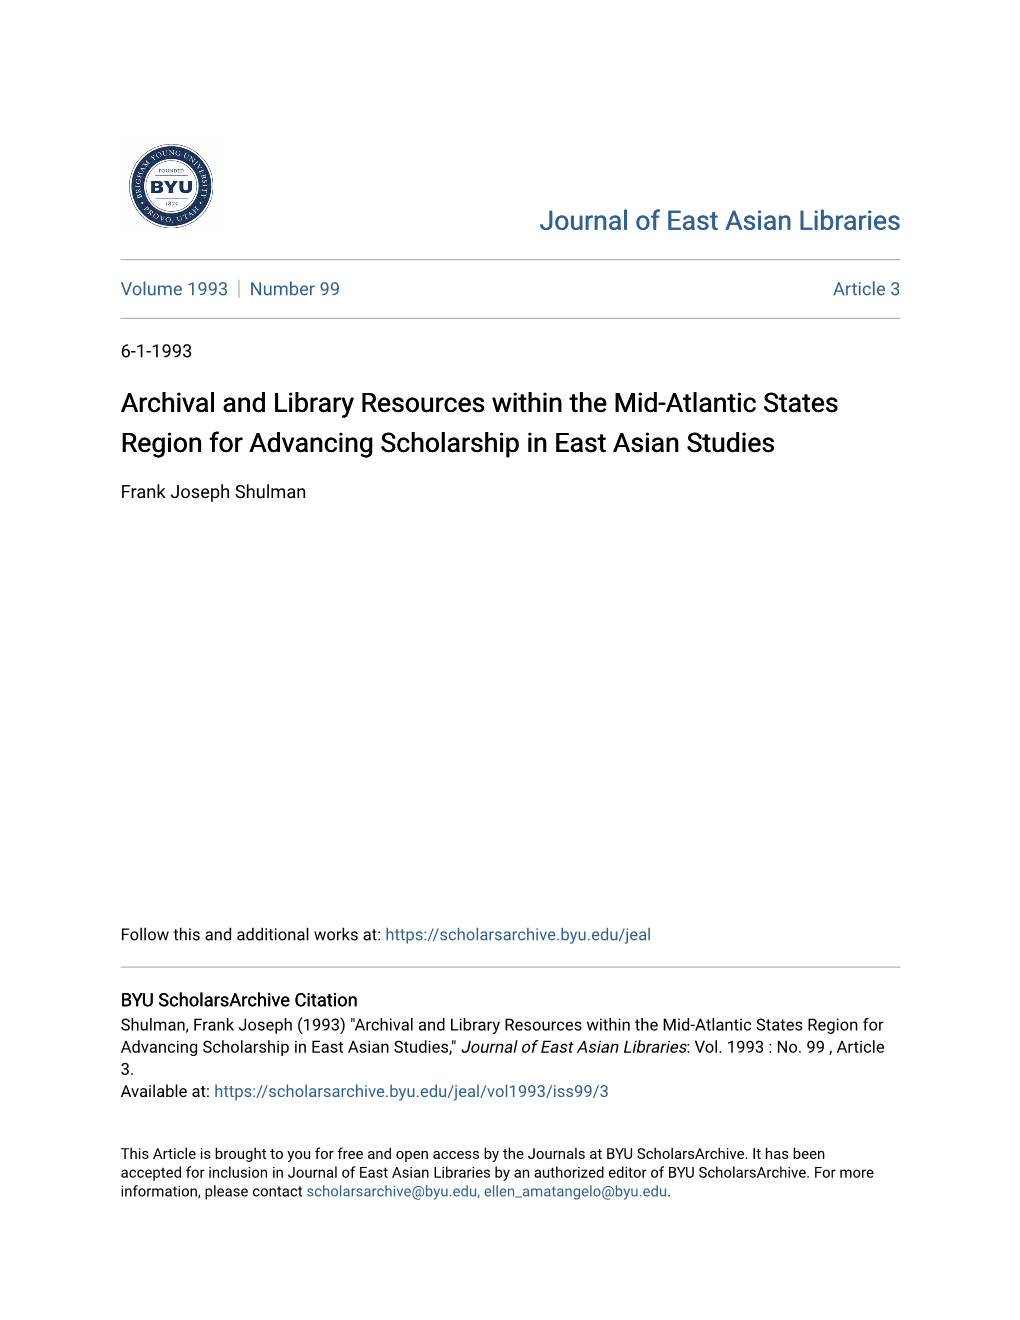 Archival and Library Resources Within the Mid-Atlantic States Region for Advancing Scholarship in East Asian Studies